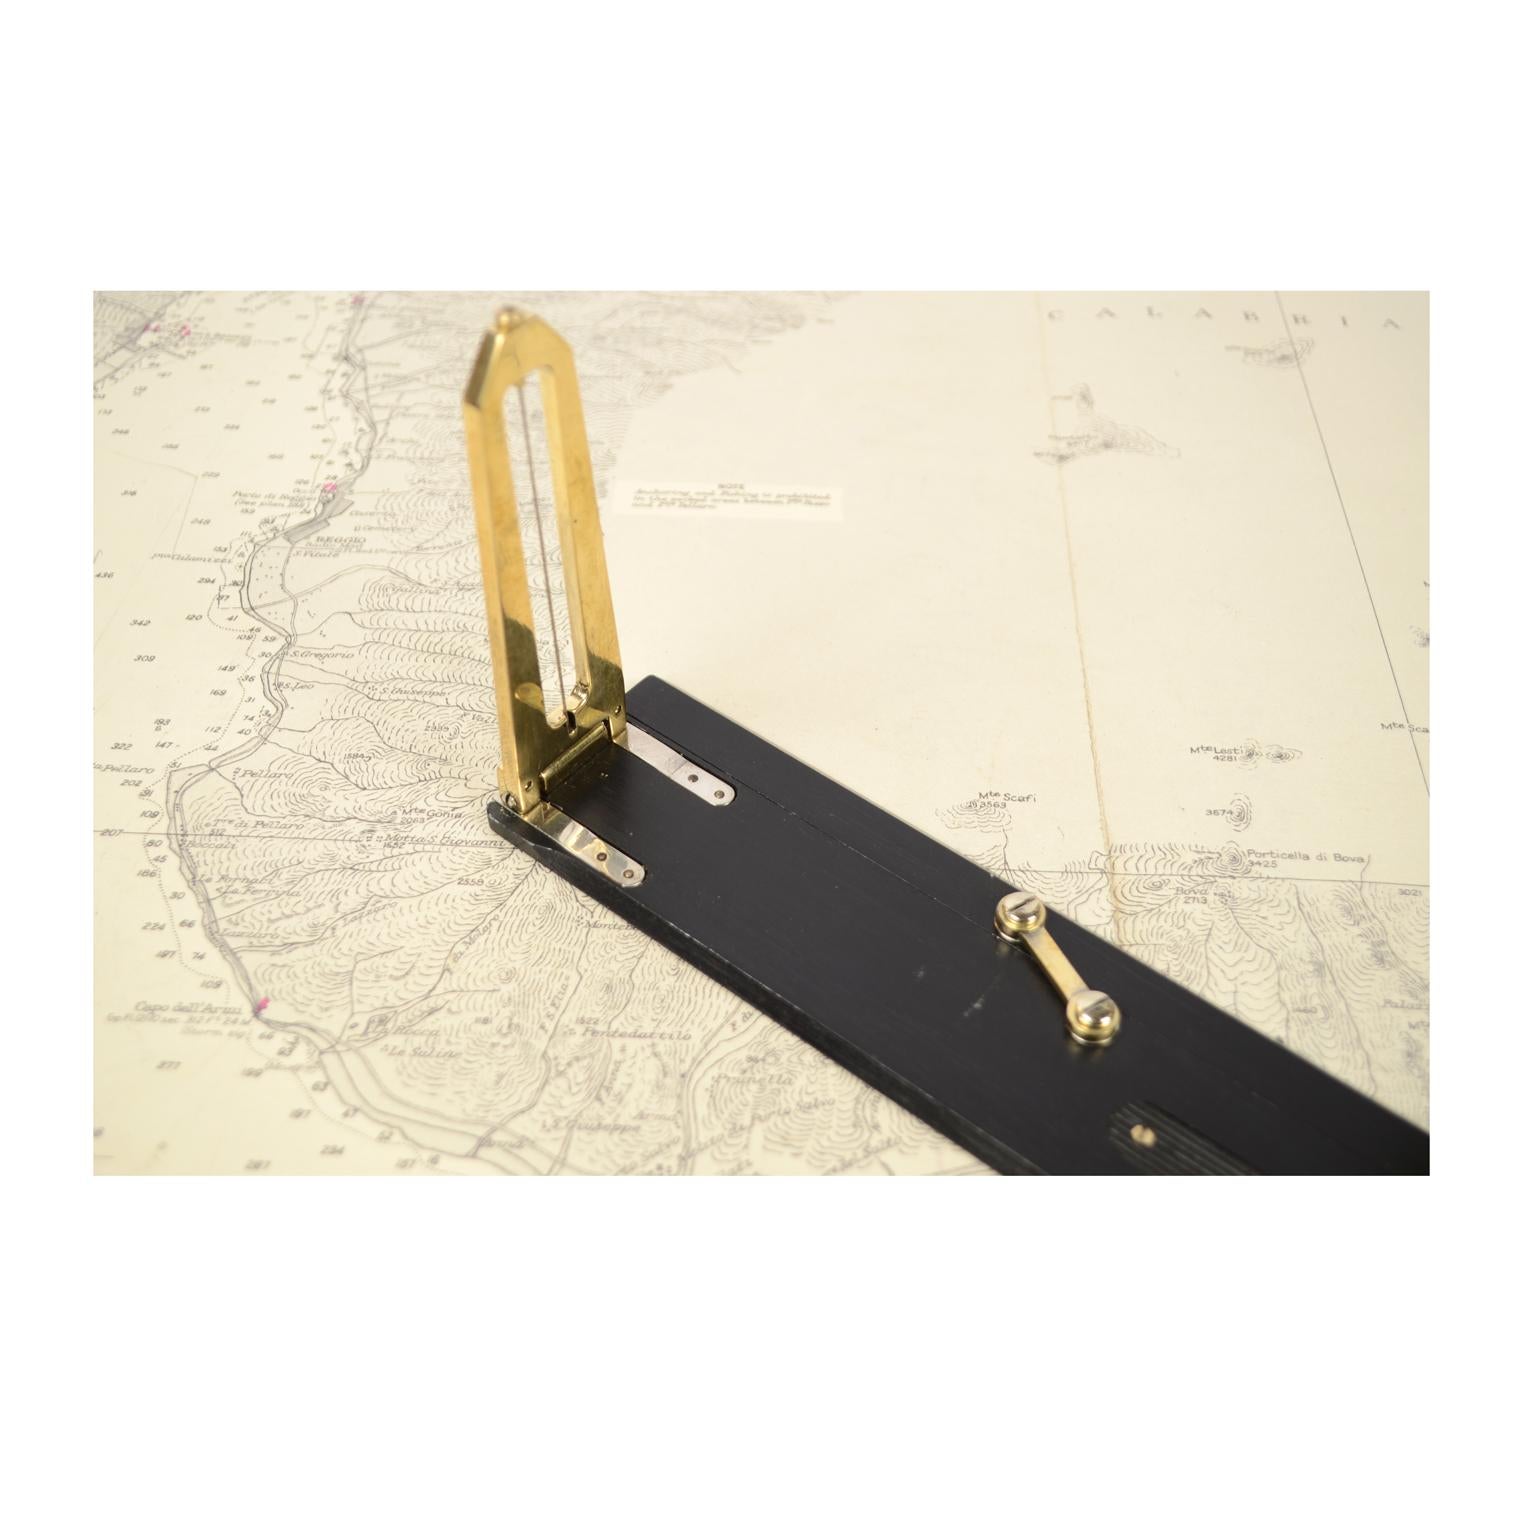 London 1940s Aluminium and Brass Antique Parallels For Surveyor's Instrument For Sale 5